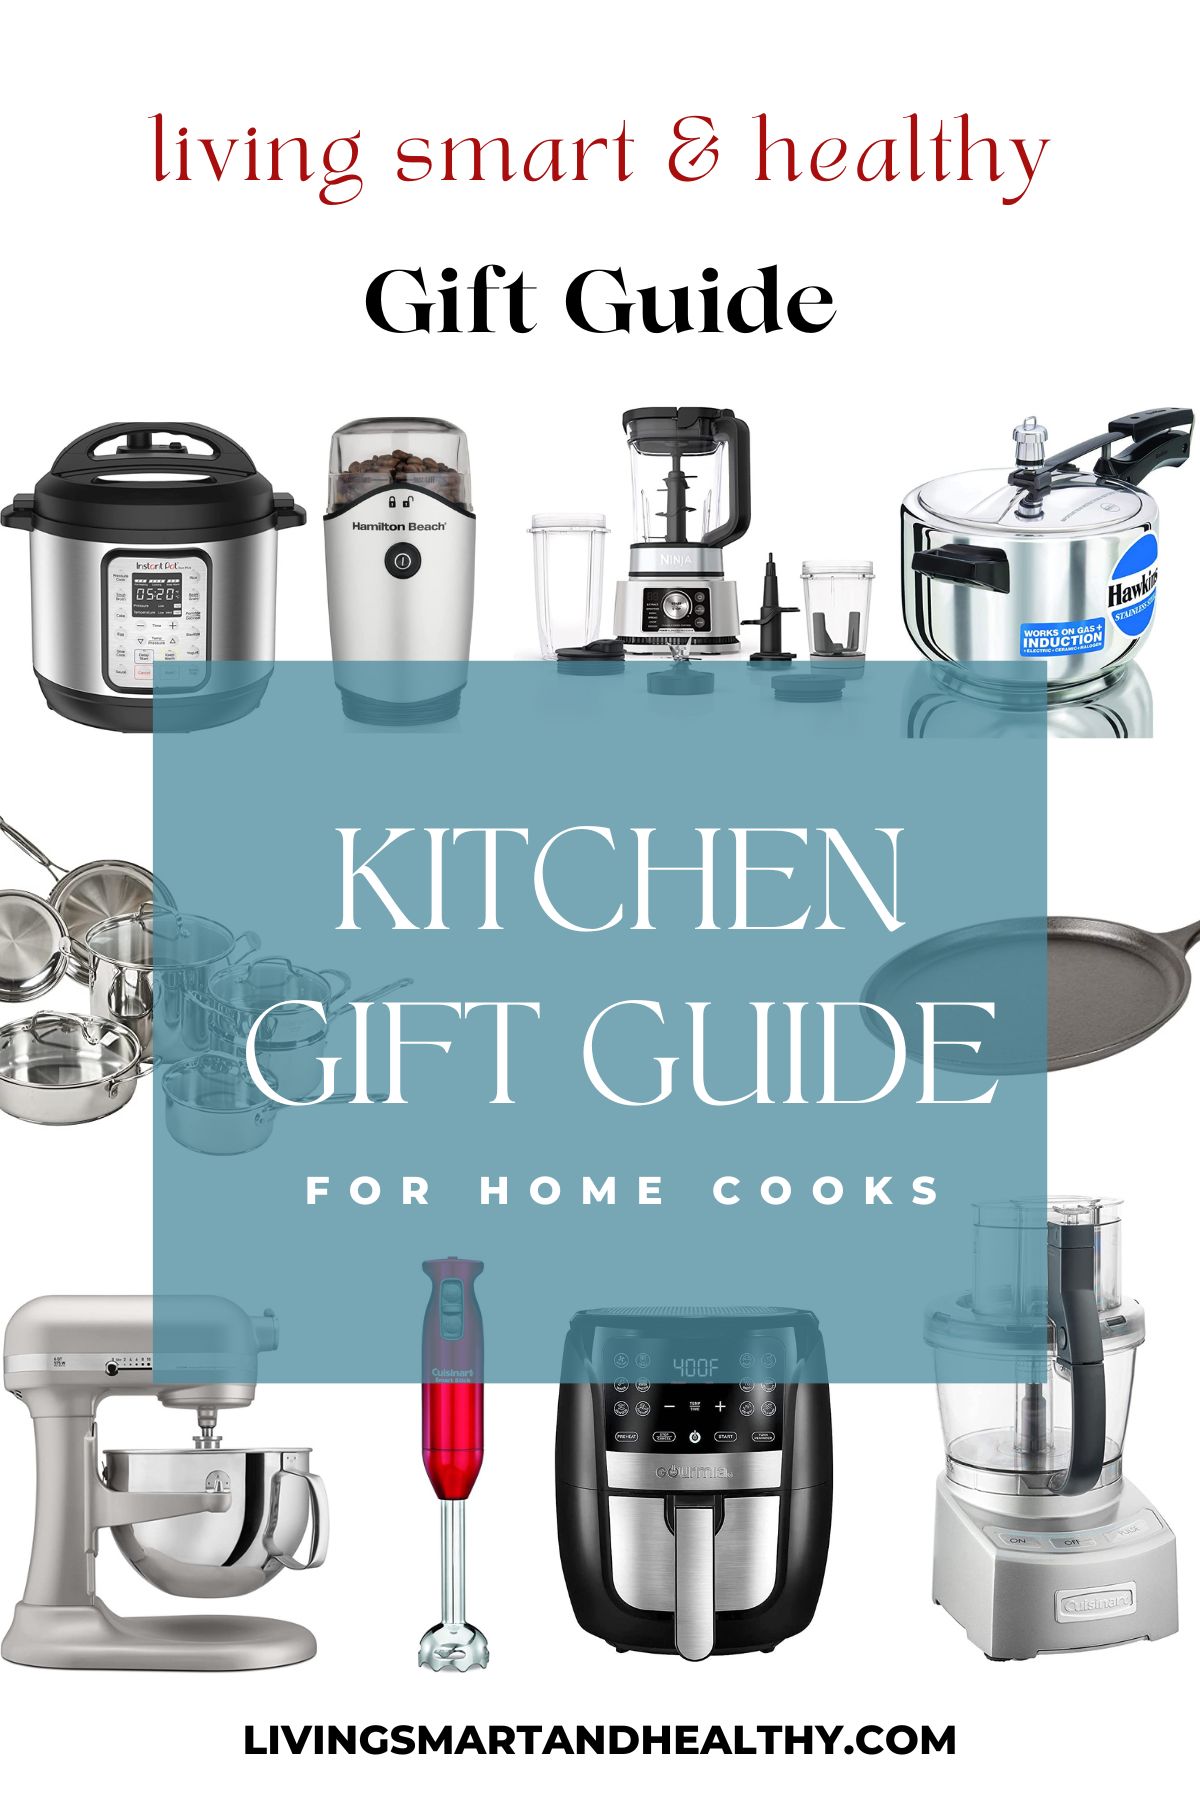 Gift Guide  Chef-tested kitchen gadgets